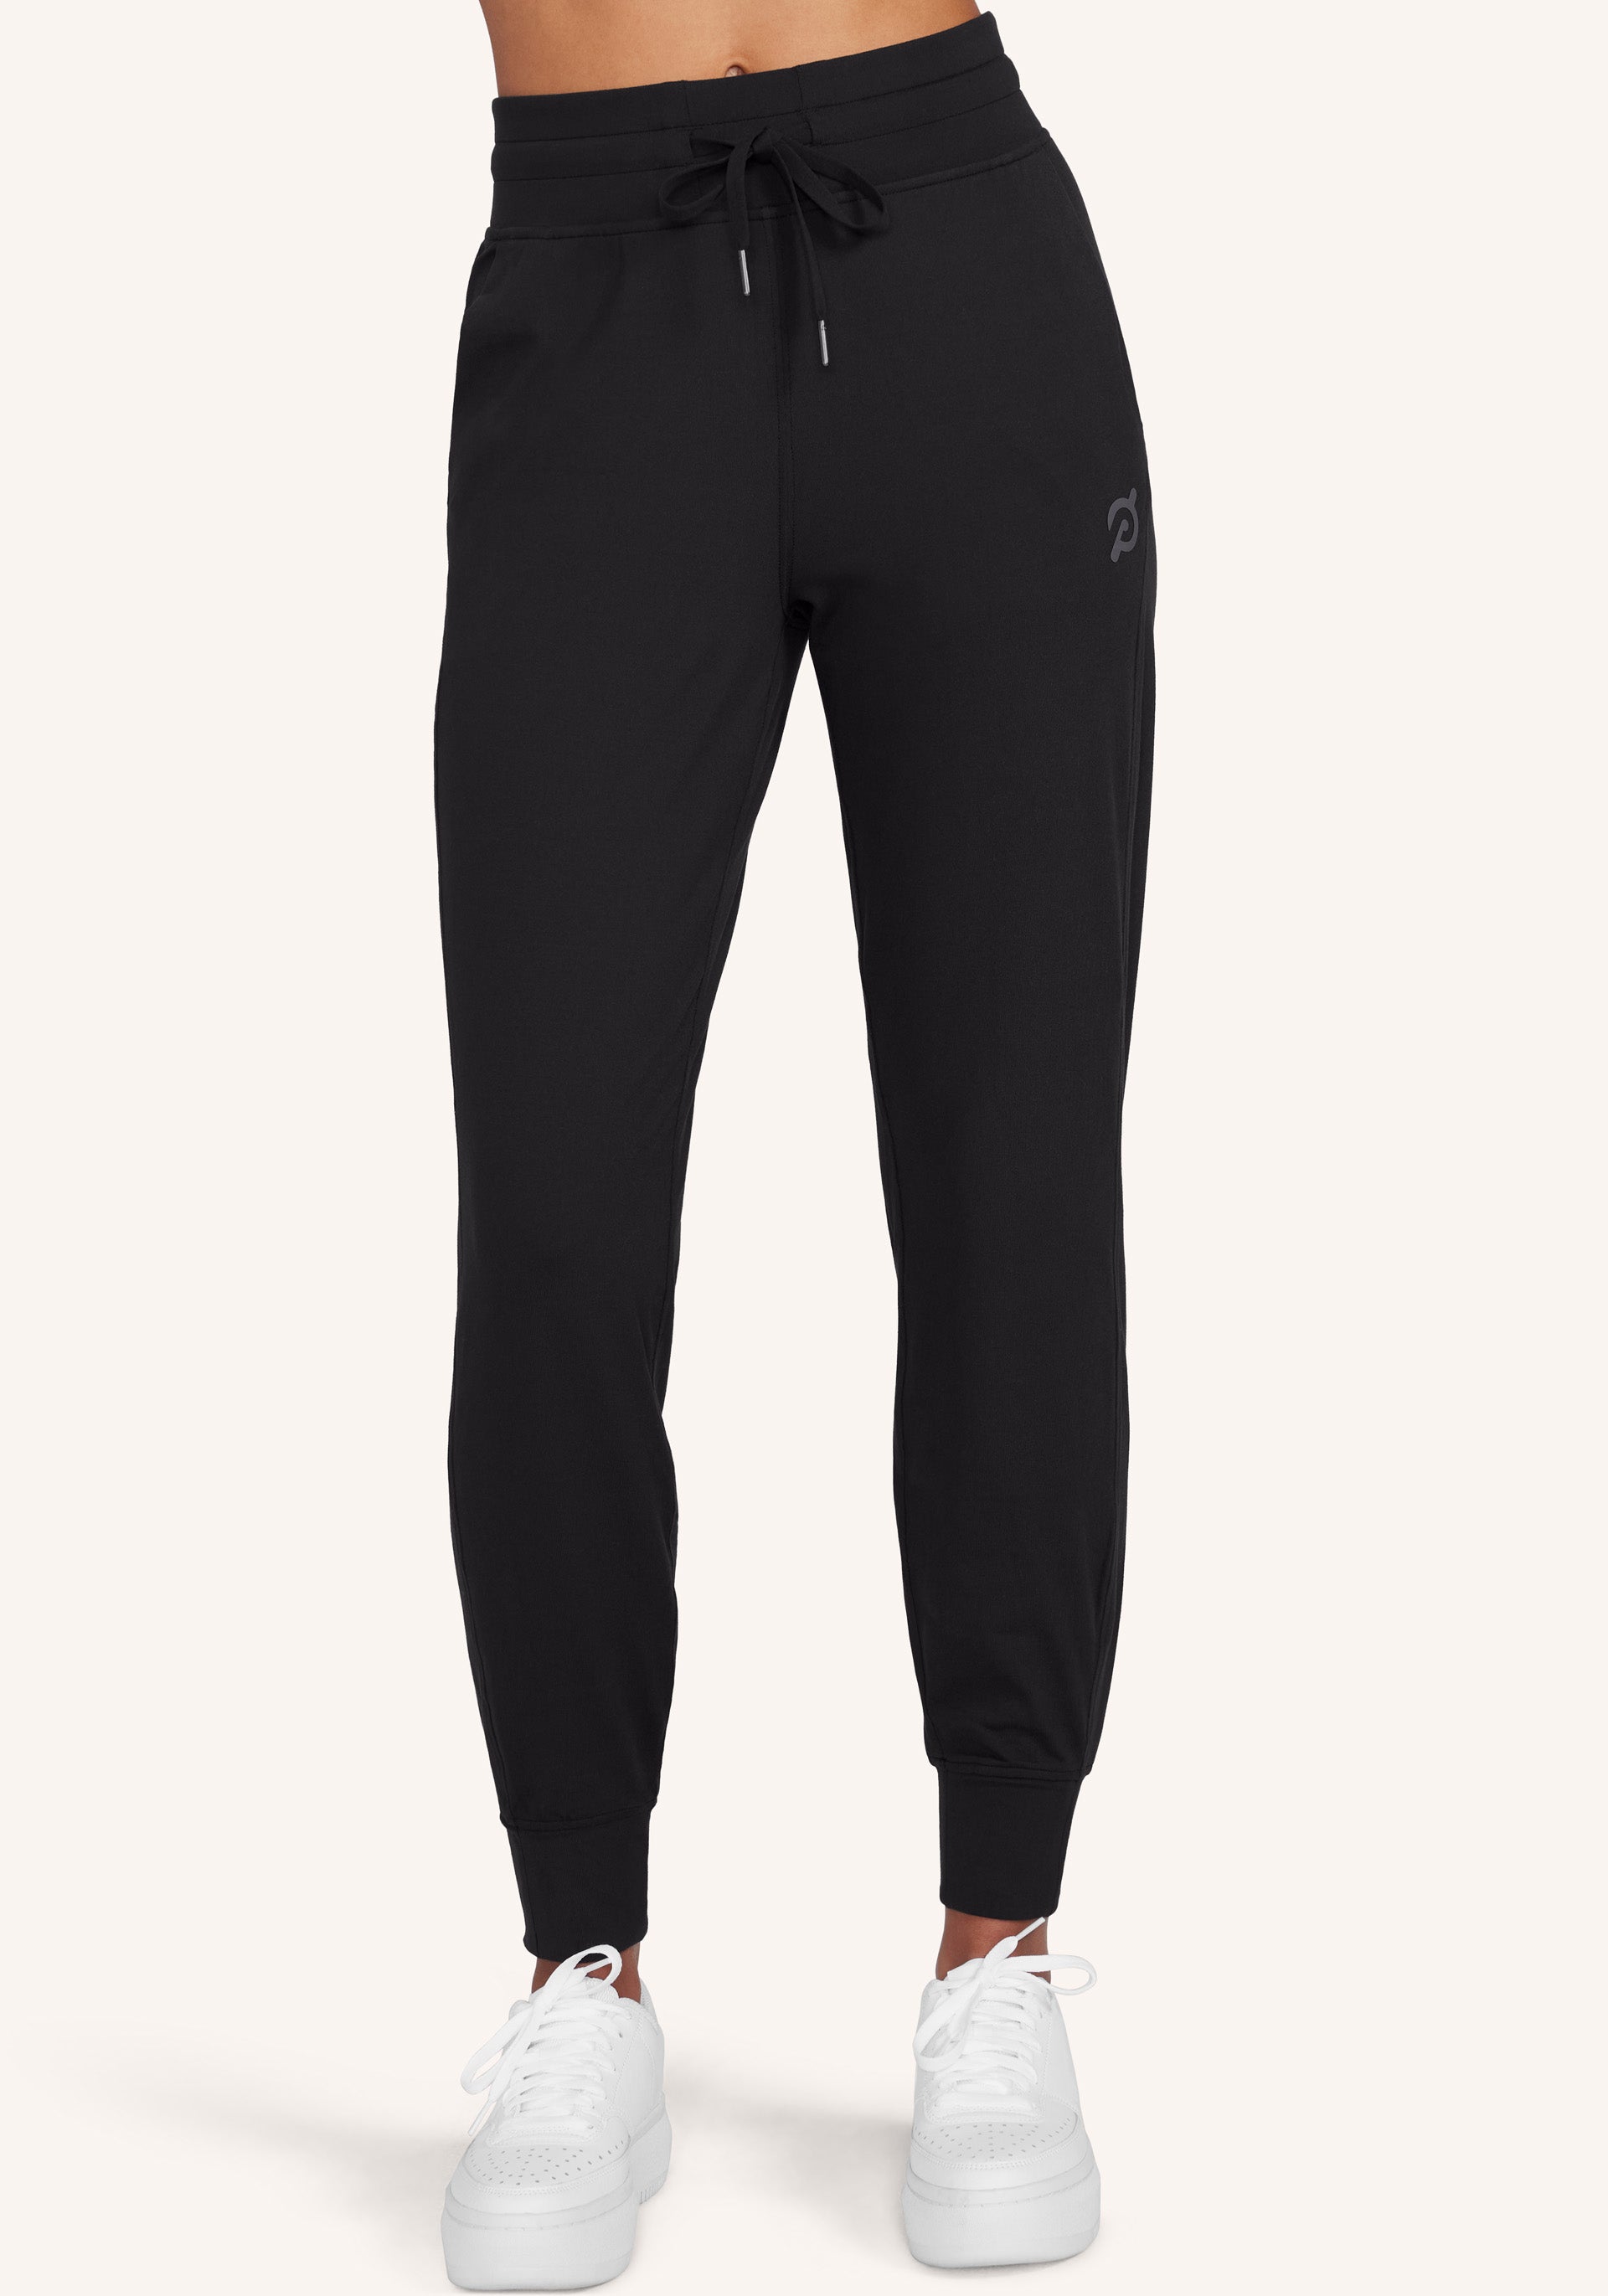 Ready to Rulu Jogger *Asia Fit, Black